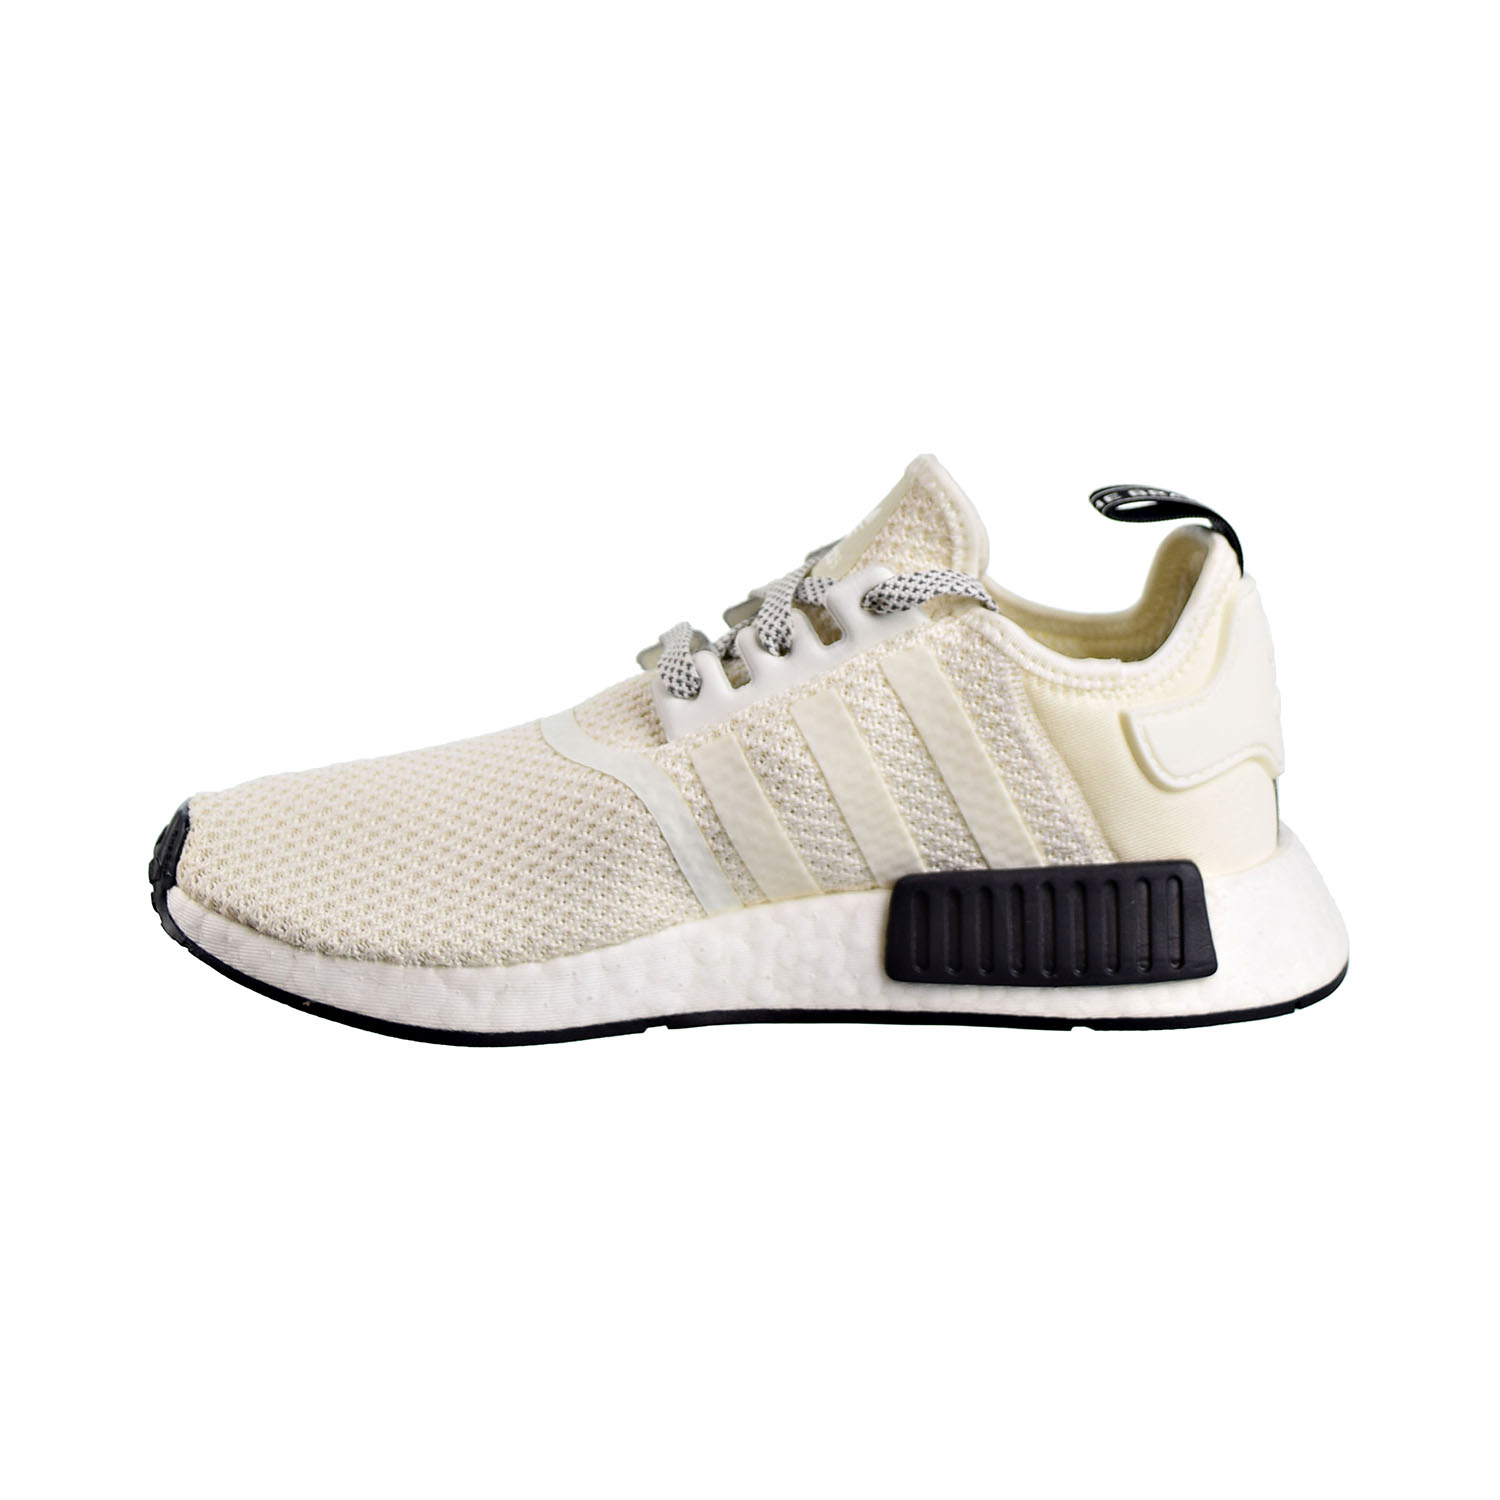 off white carbon core black nmd